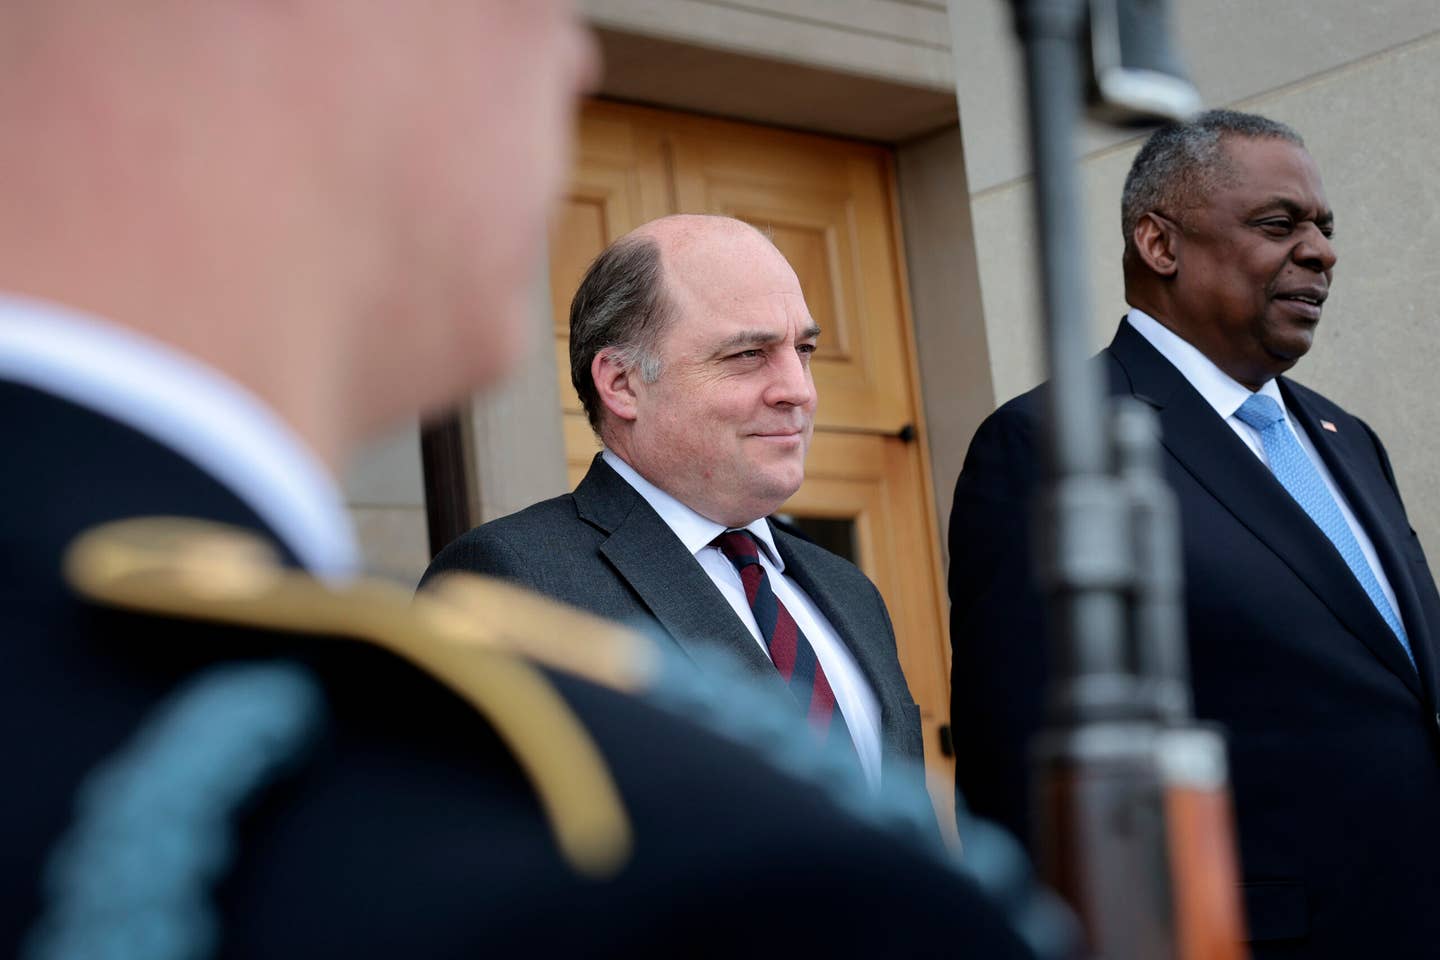 British Secretary of State for Defence Ben Wallace (left) is welcomed to the Pentagon in Arlington, Virginia, last month by U.S. Secretary of Defense Lloyd Austin (right). <em>Photo by Win McNamee/Getty Images</em>